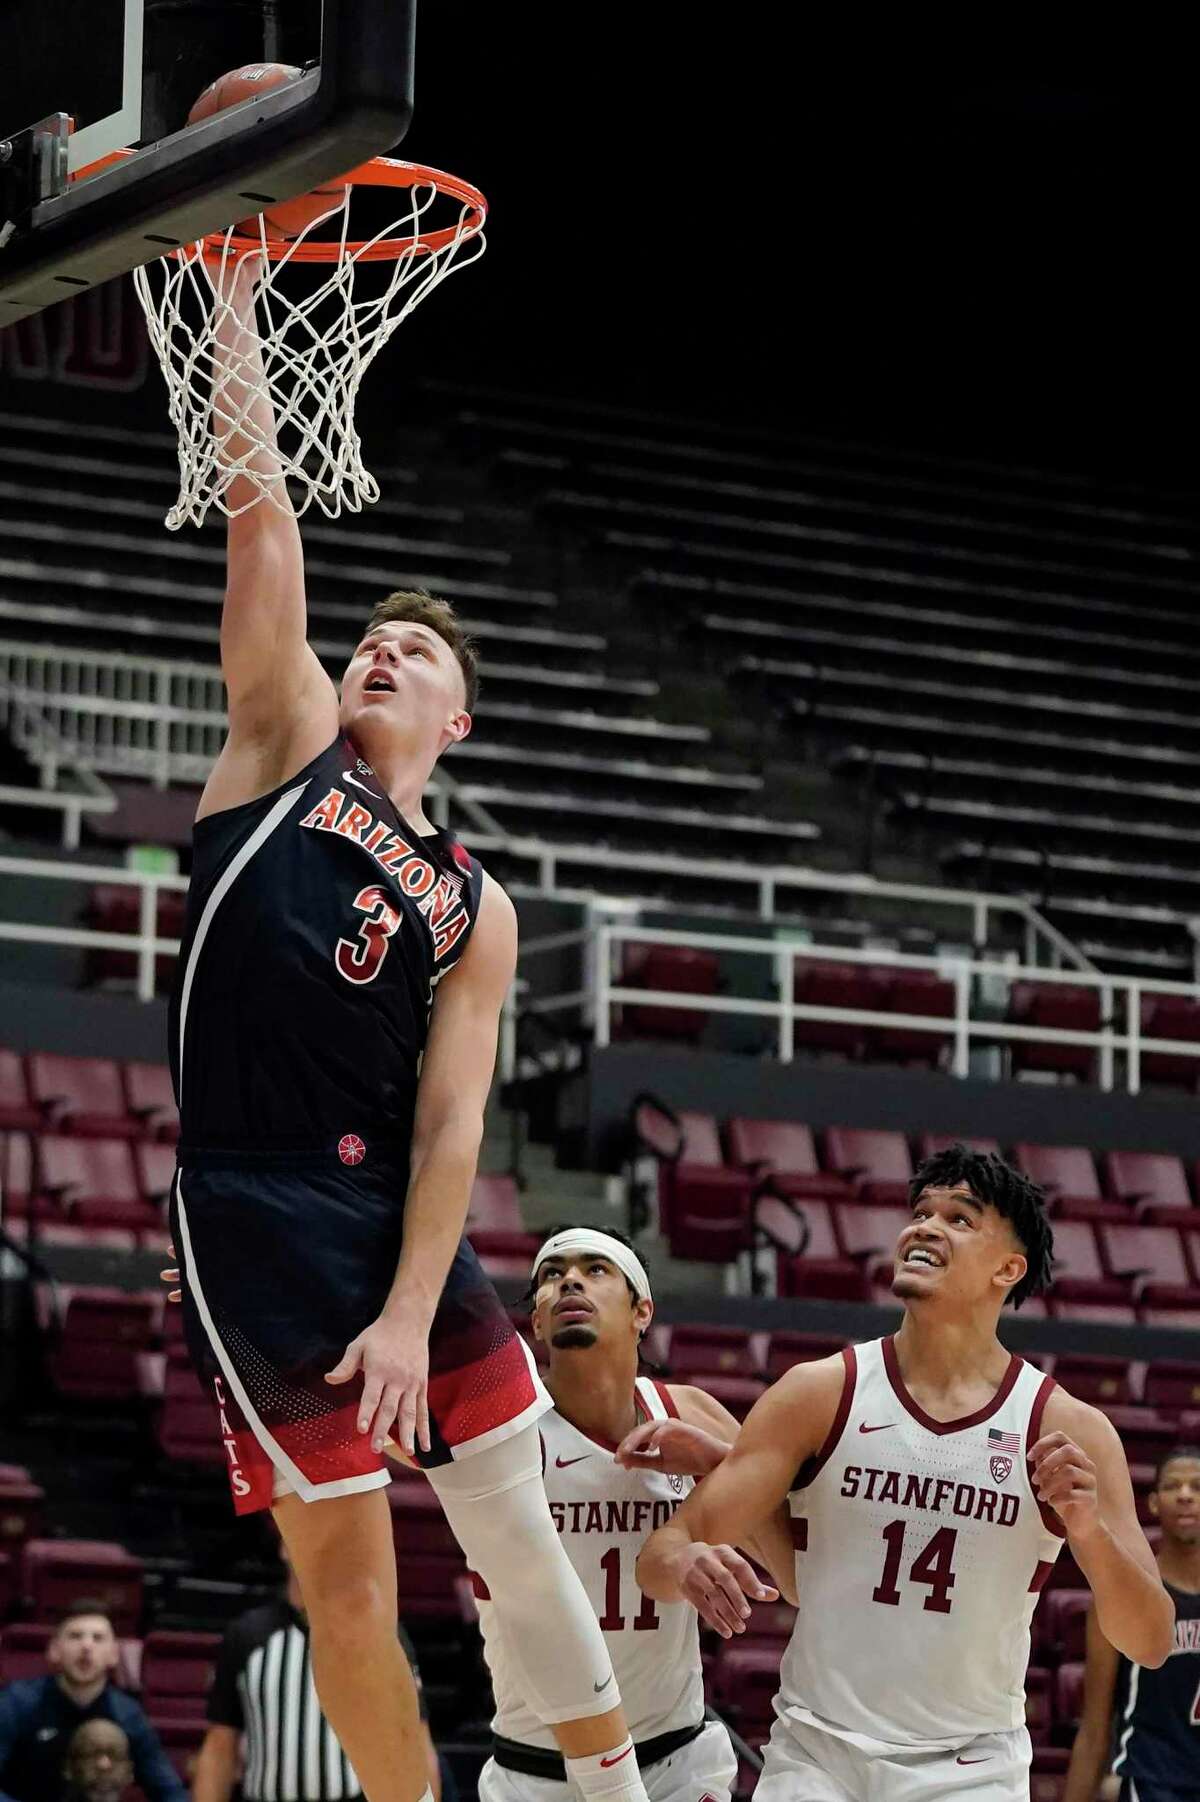 Arizona guard Pelle Larsson (3) shoots over Stanford forward Jaiden Delaire (11) and forward Spencer Jones (14) during the second half of an NCAA college basketball game in Stanford, Calif., Thursday, Jan. 20, 2022. (AP Photo/Jeff Chiu)